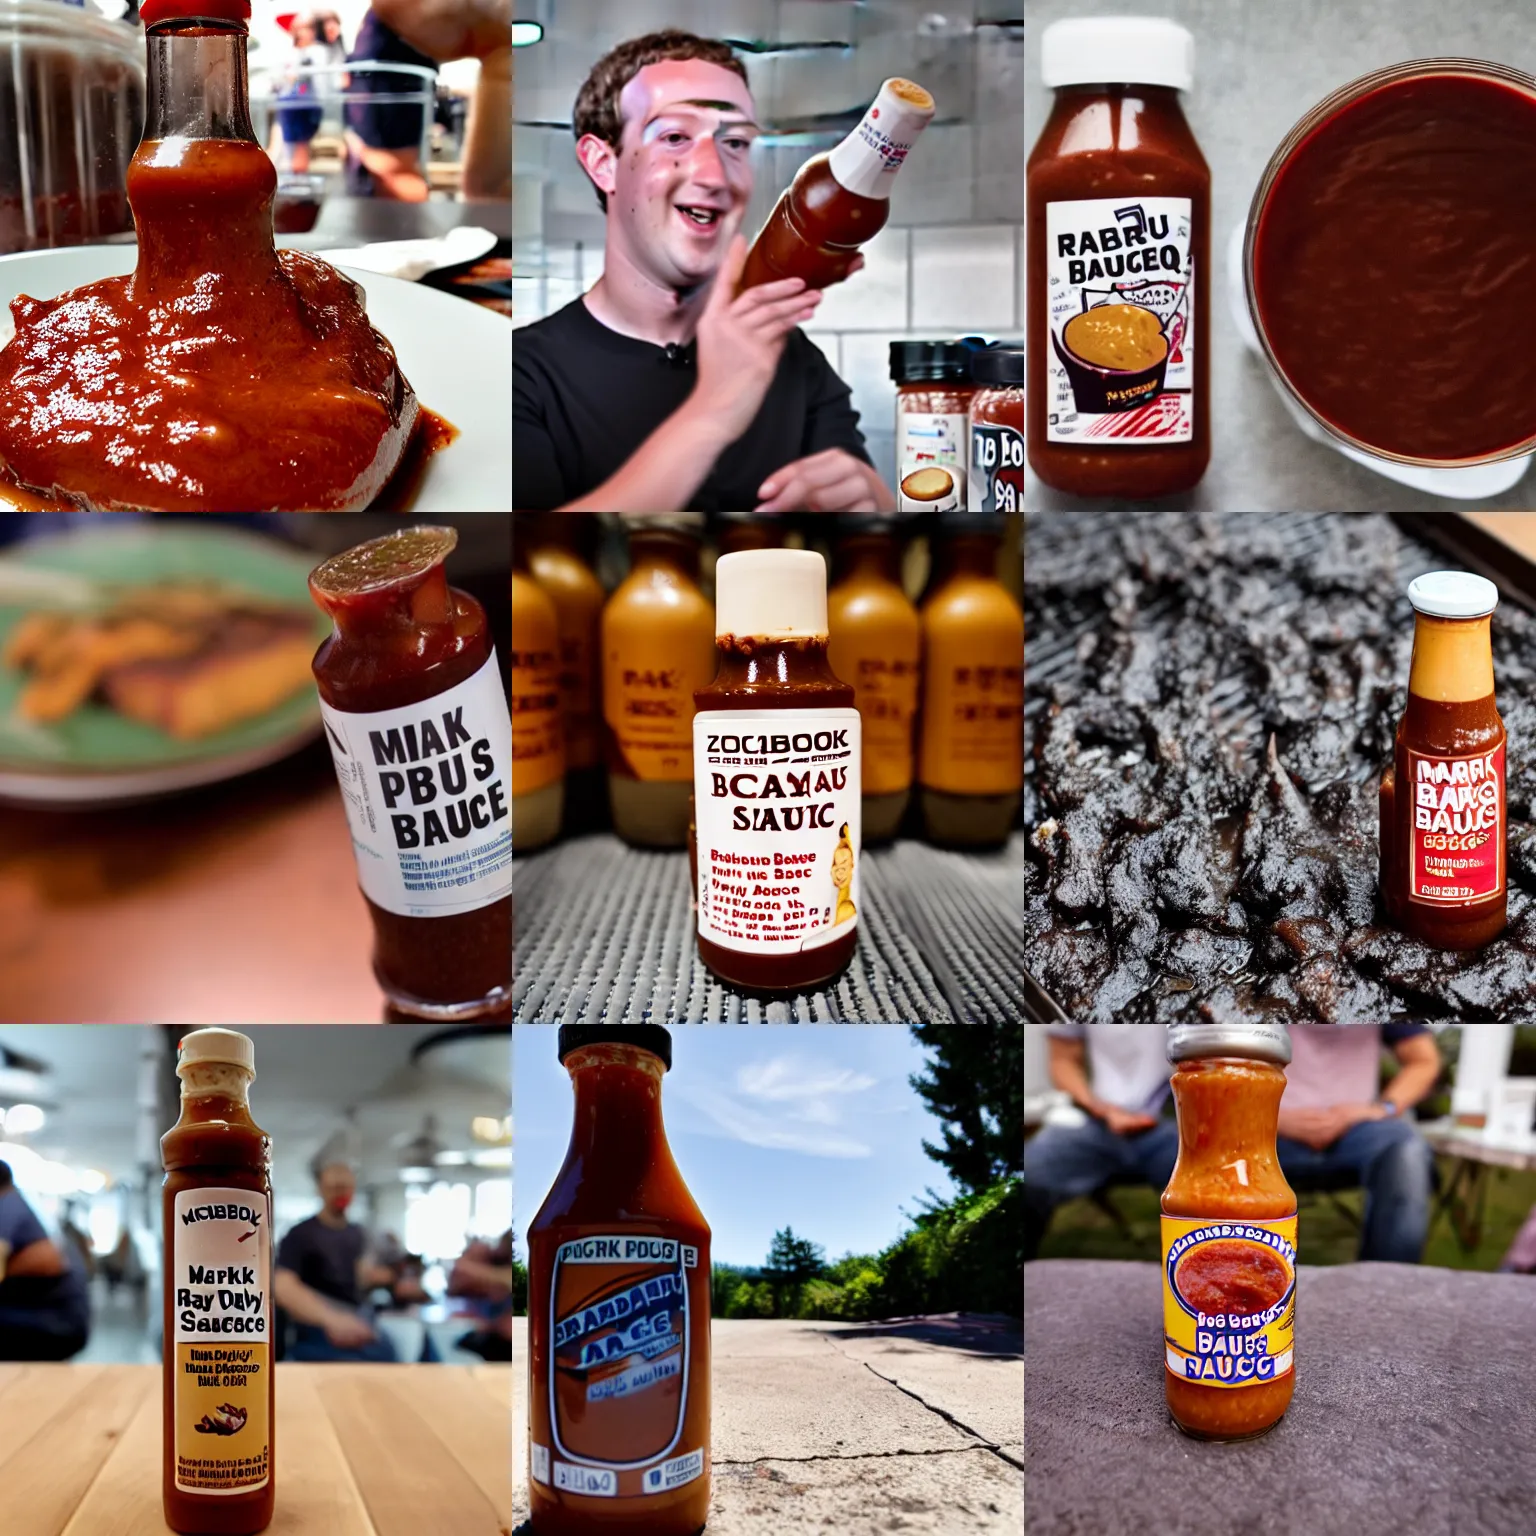 Prompt: mark zuckerberg hits you with a baby ray's bbq sauce bottle, pov photography